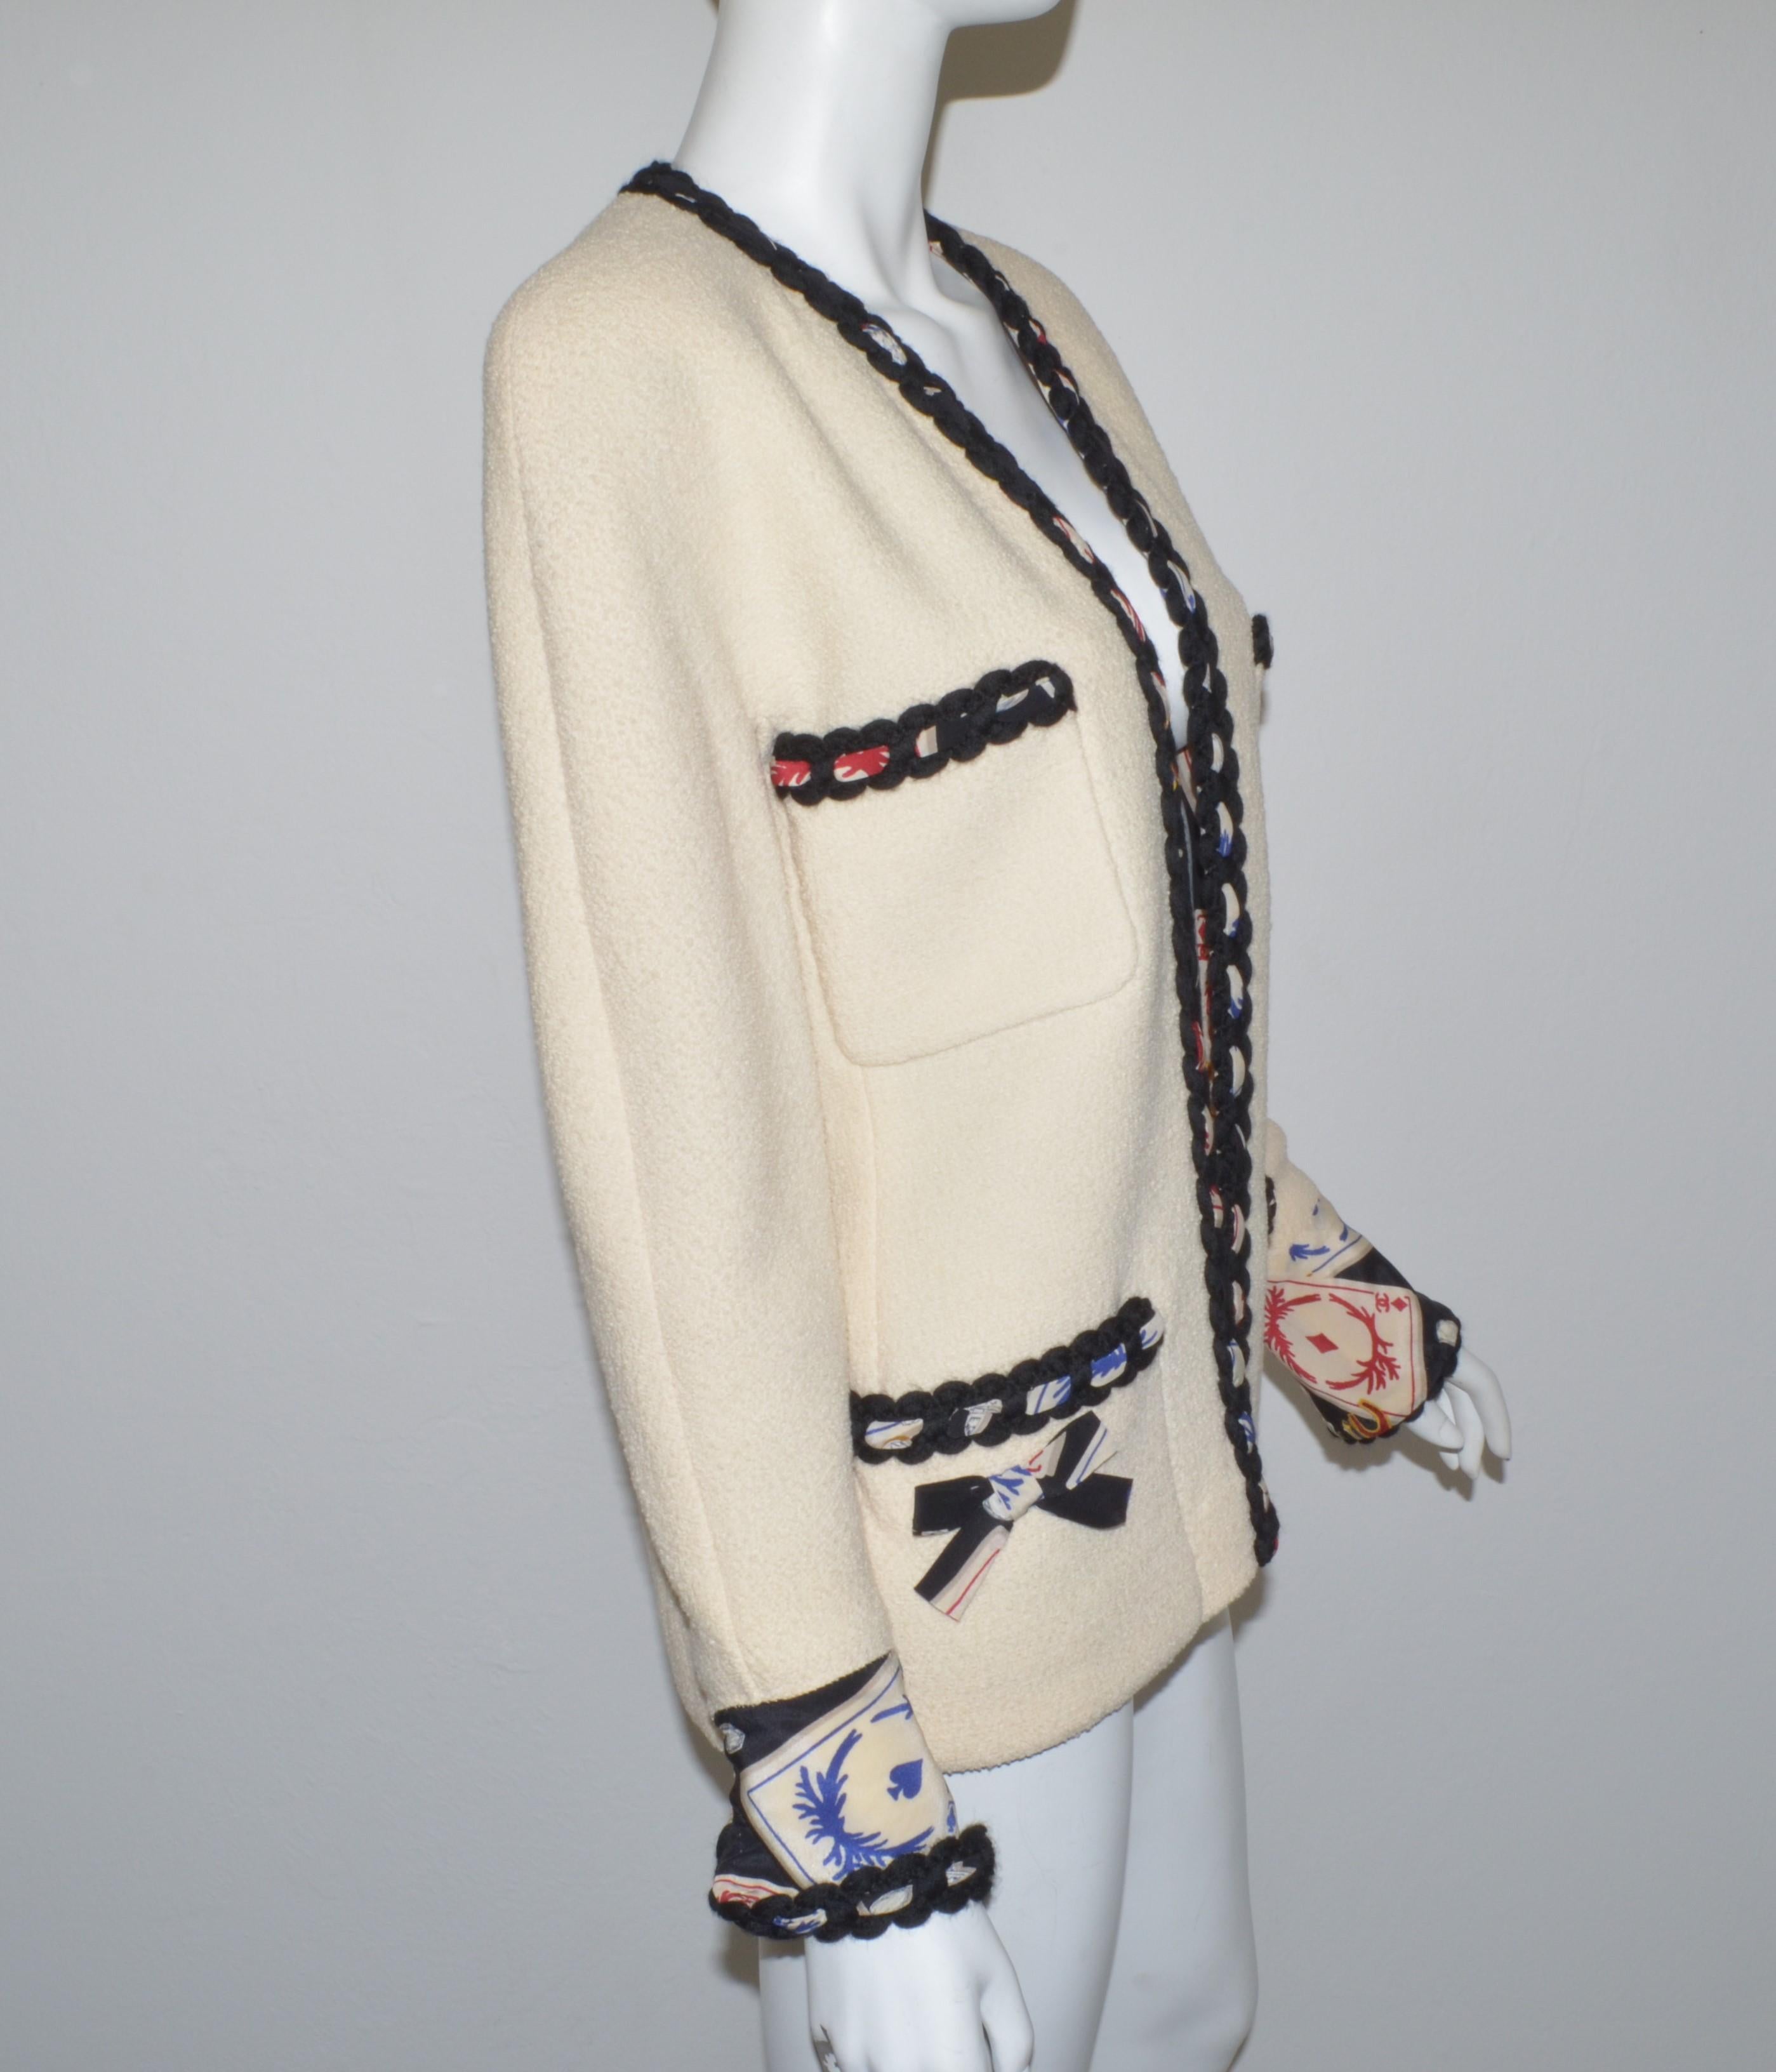 Beige 1995 Vintage Chanel Tweed Jacket with Playing Cards Motif